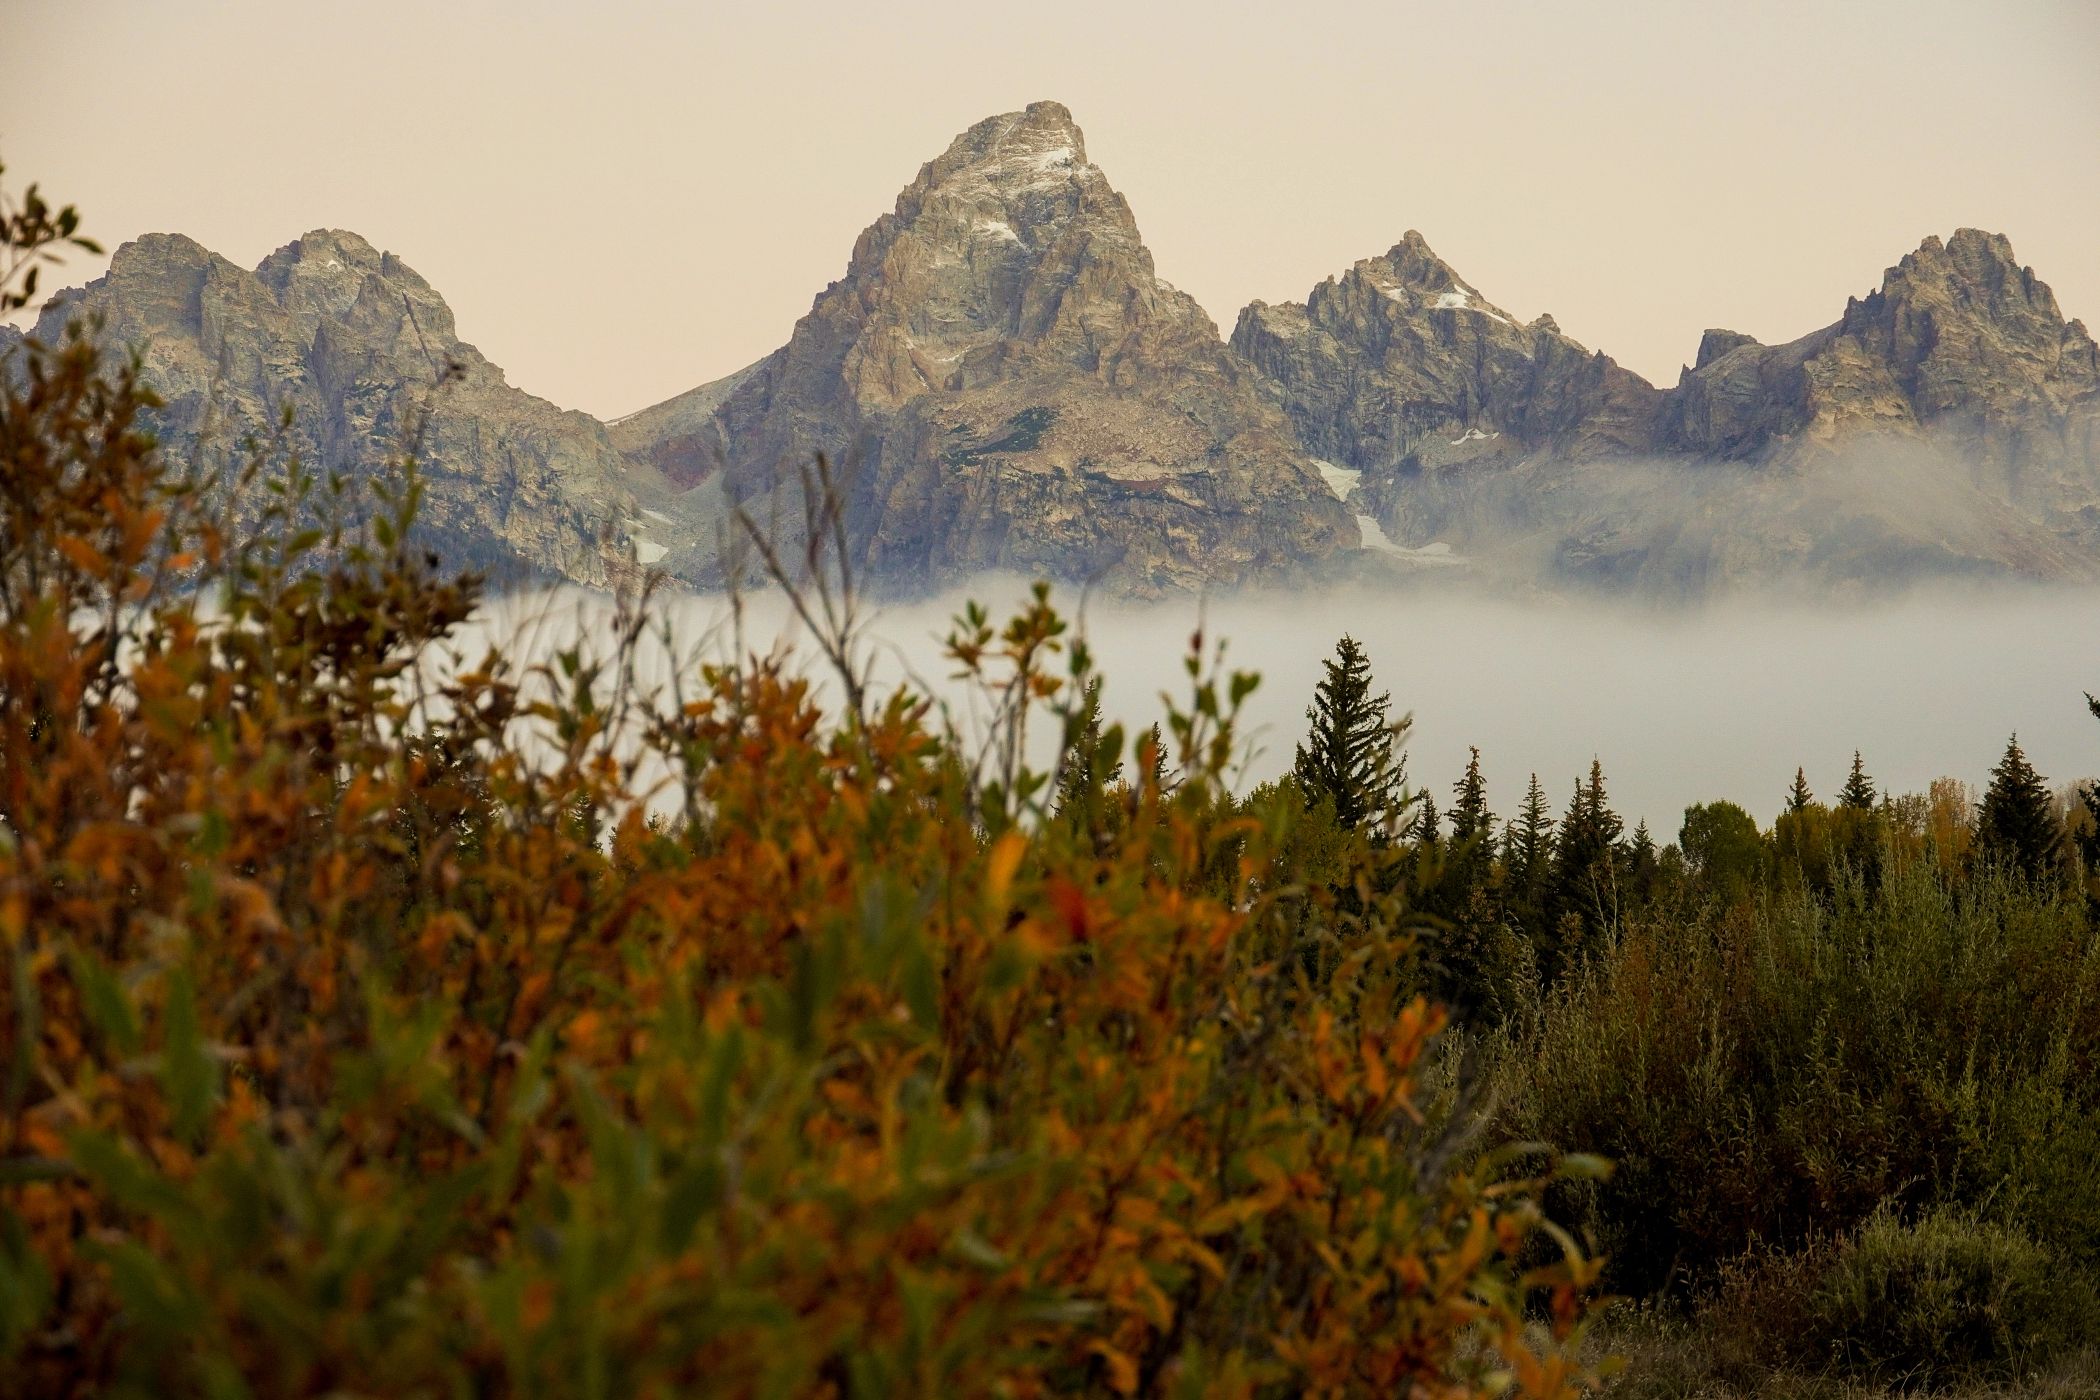 View of the tetons at Blacktail Ponds during an inversion